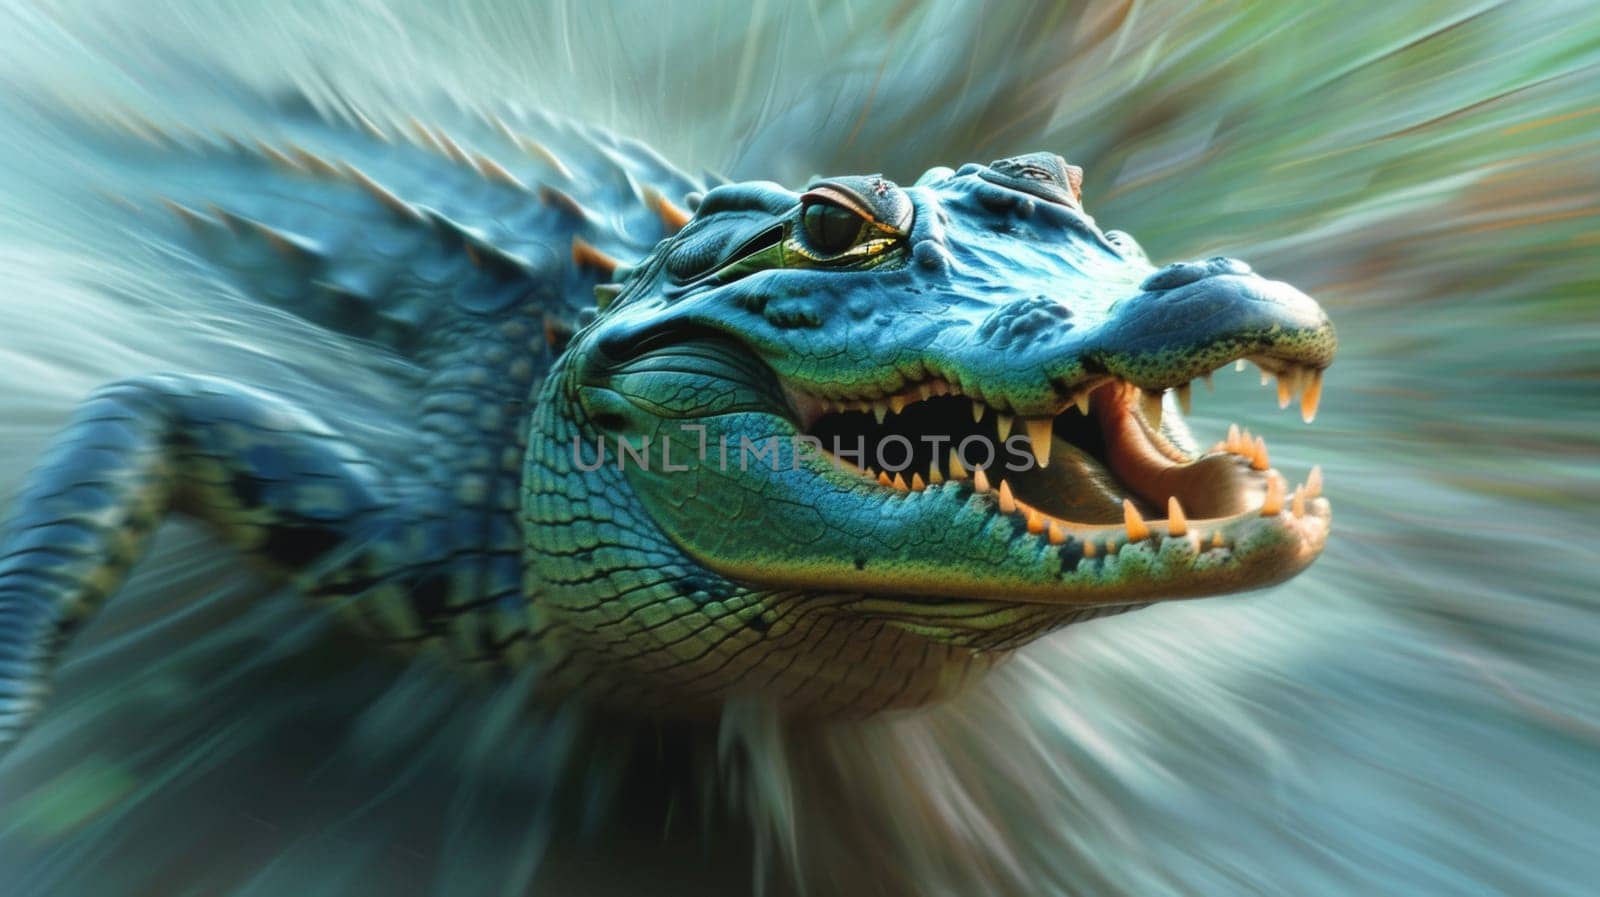 A close up of a large alligator with its mouth open, AI by starush